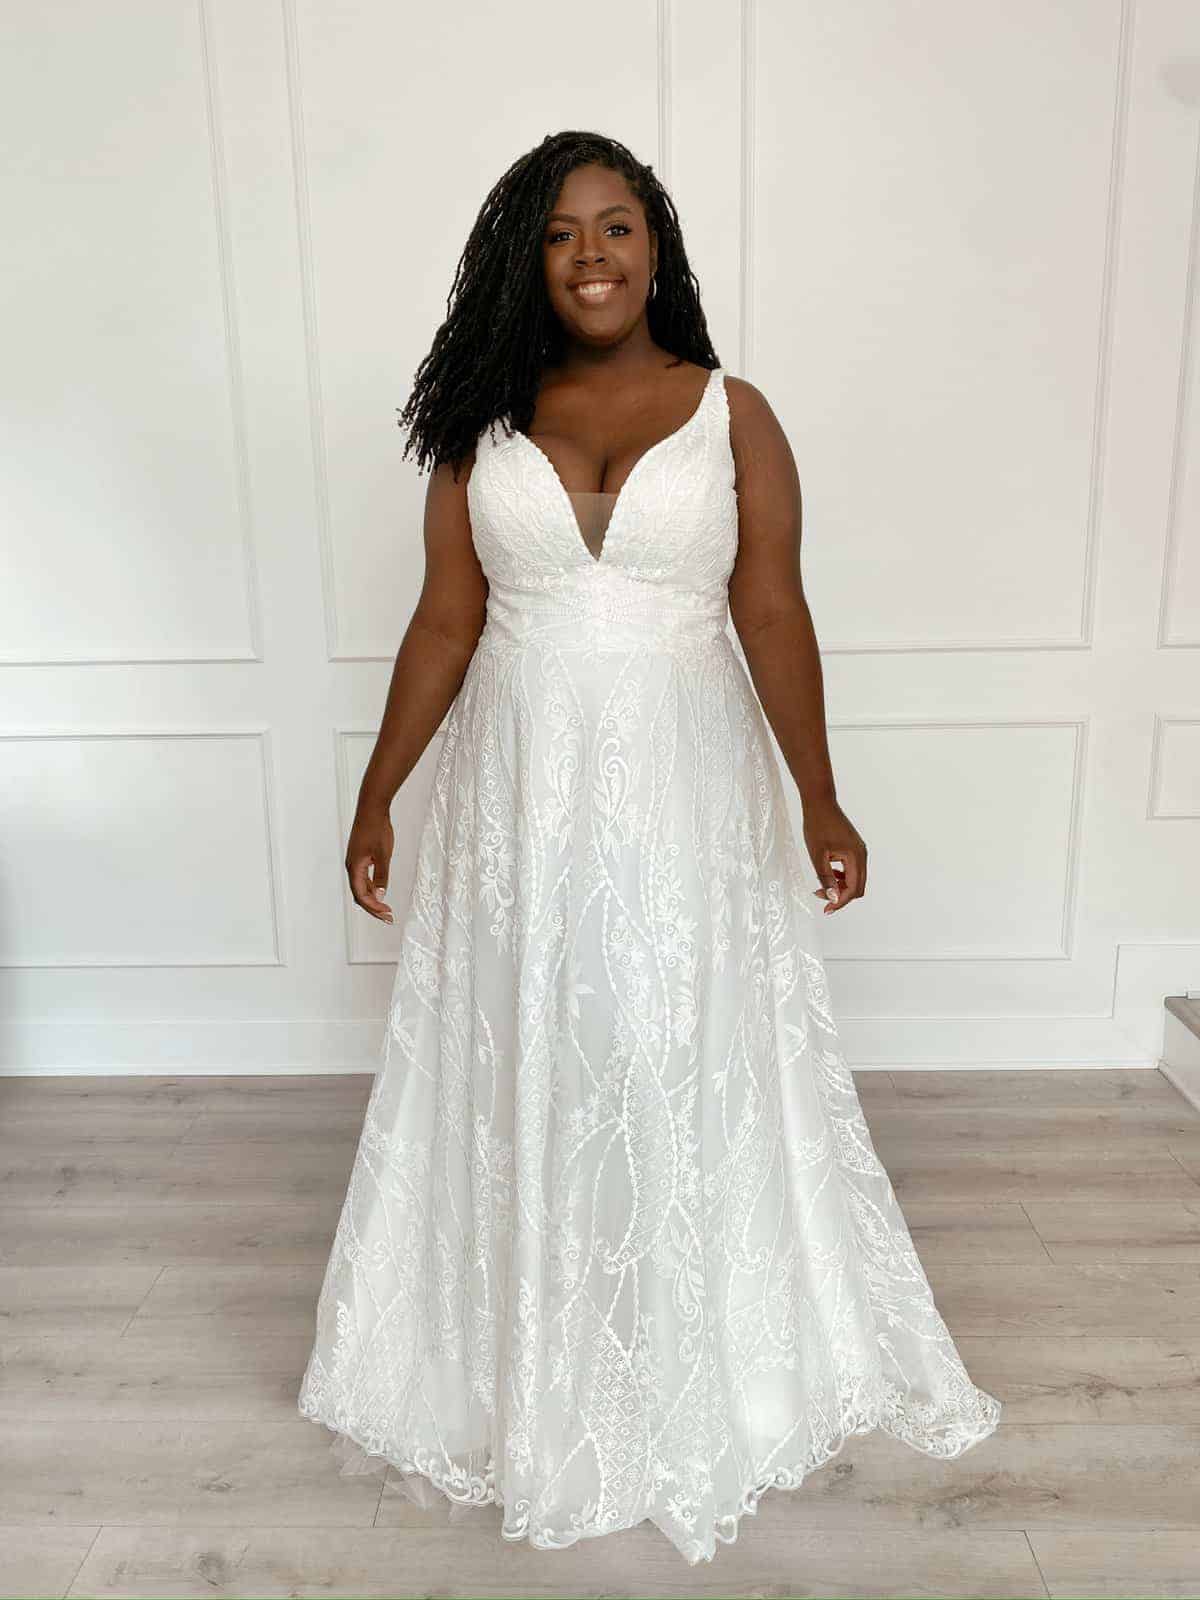 Most Flattering Silhouettes for Plus-Size Brides